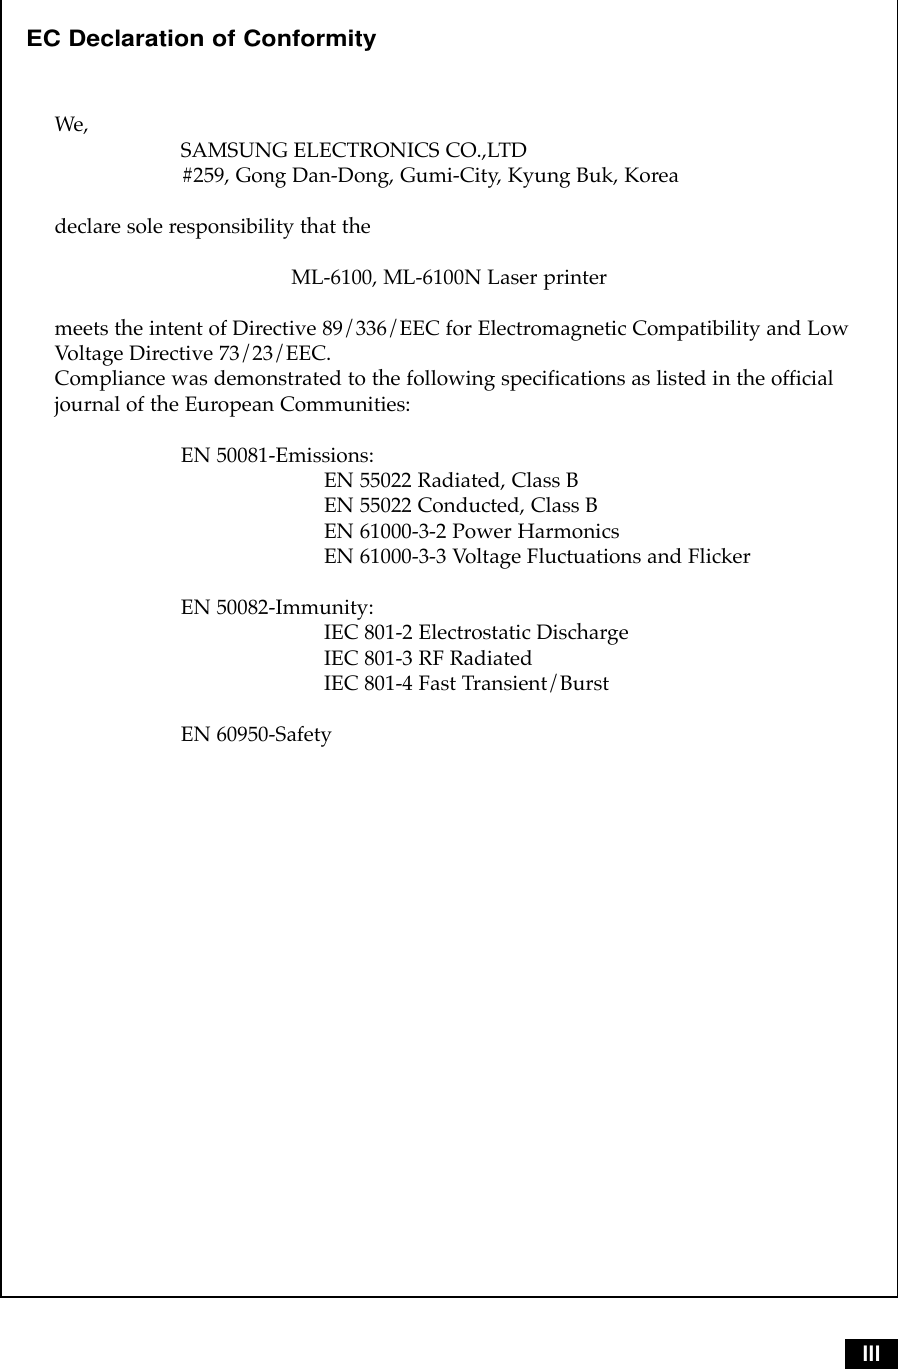 IIIEC Declaration of ConformityWe,SAMSUNG ELECTRONICS CO.,LTD#259, Gong Dan-Dong, Gumi-City, Kyung Buk, Koreadeclare sole responsibility that the ML-6100, ML-6100N Laser printermeets the intent of Directive 89/336/EEC for Electromagnetic Compatibility and LowVoltage Directive 73/23/EEC.Compliance was demonstrated to the following specifications as listed in the officialjournal of the European Communities:EN 50081-Emissions:EN 55022 Radiated, Class BEN 55022 Conducted, Class BEN 61000-3-2 Power HarmonicsEN 61000-3-3 Voltage Fluctuations and FlickerEN 50082-Immunity:IEC 801-2 Electrostatic DischargeIEC 801-3 RF RadiatedIEC 801-4 Fast Transient/BurstEN 60950-Safety